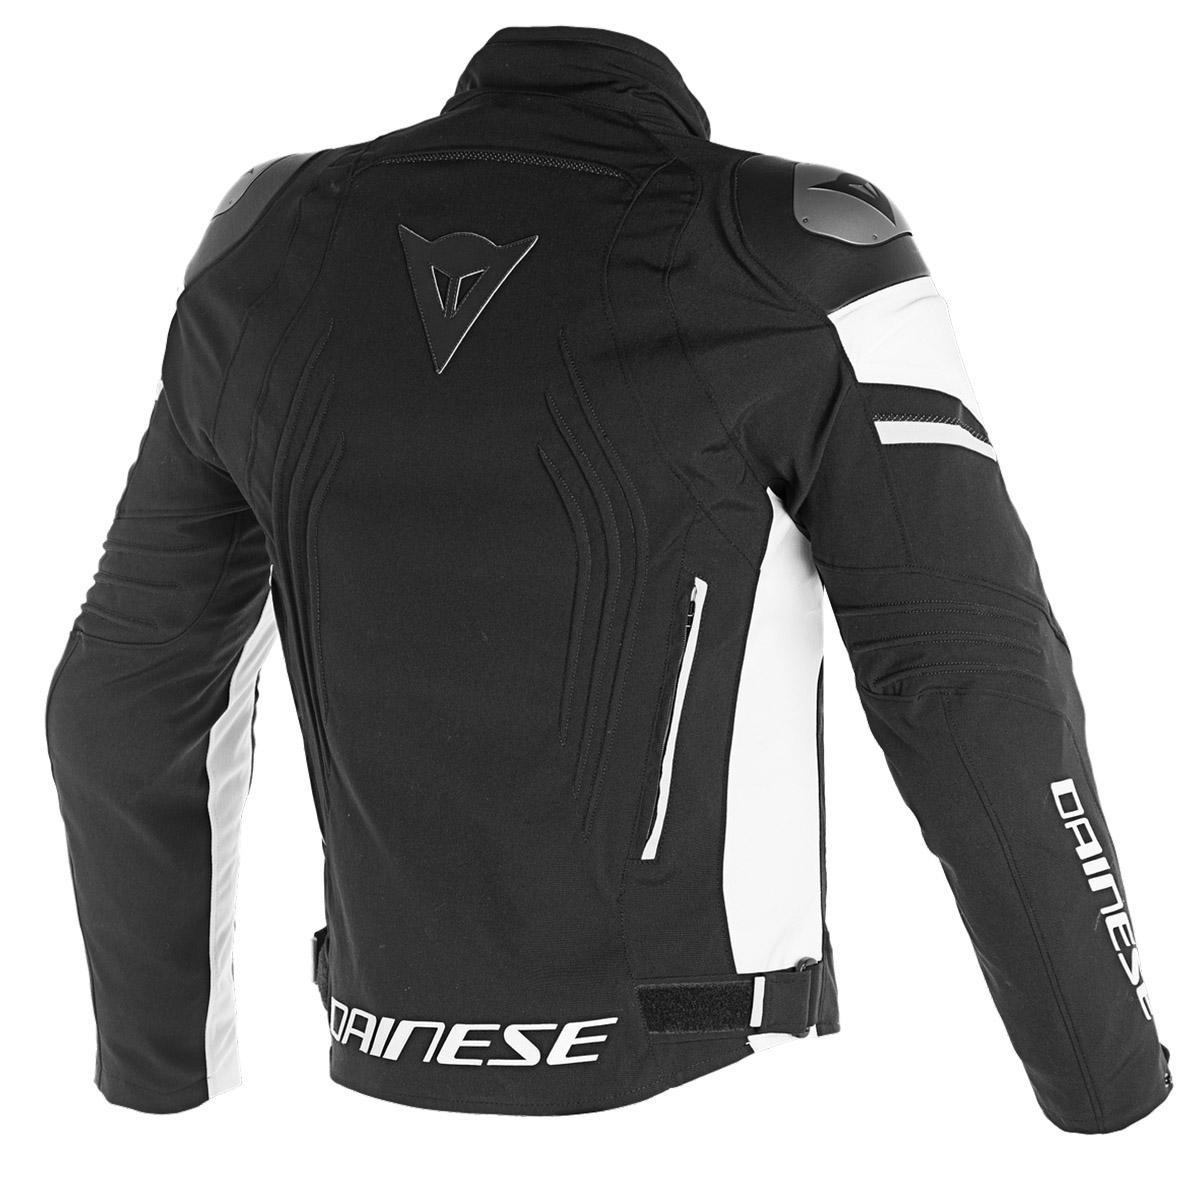 DAINESE RACING 3 D-DRY JACKET BLACK/WHITE - P&H Motorcycles